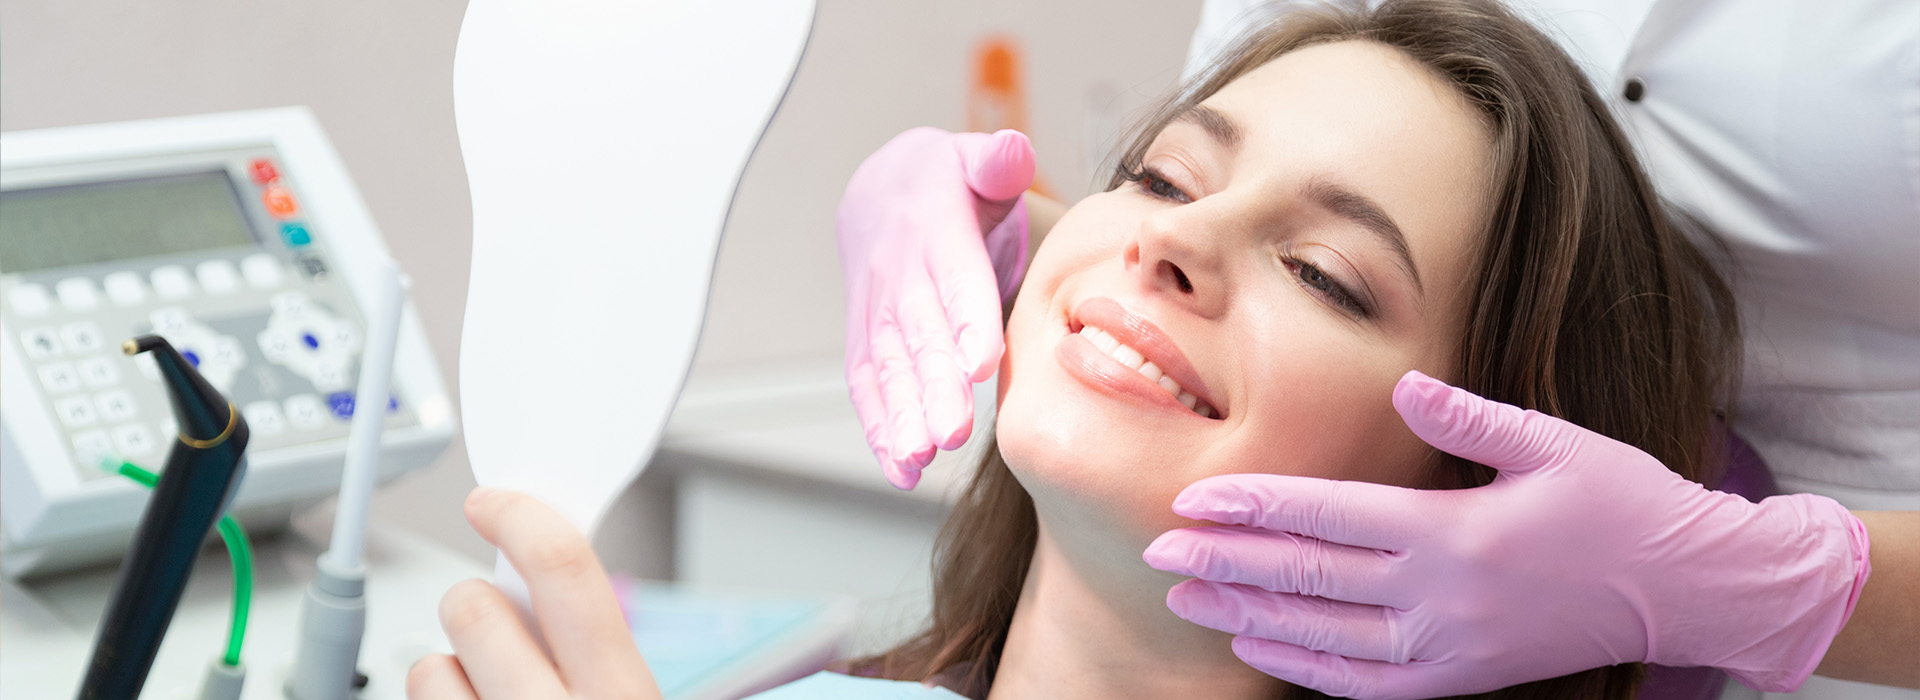 North Texas Dental Care | Laser Dentistry, Snoring Appliances and Same-Day Repairs